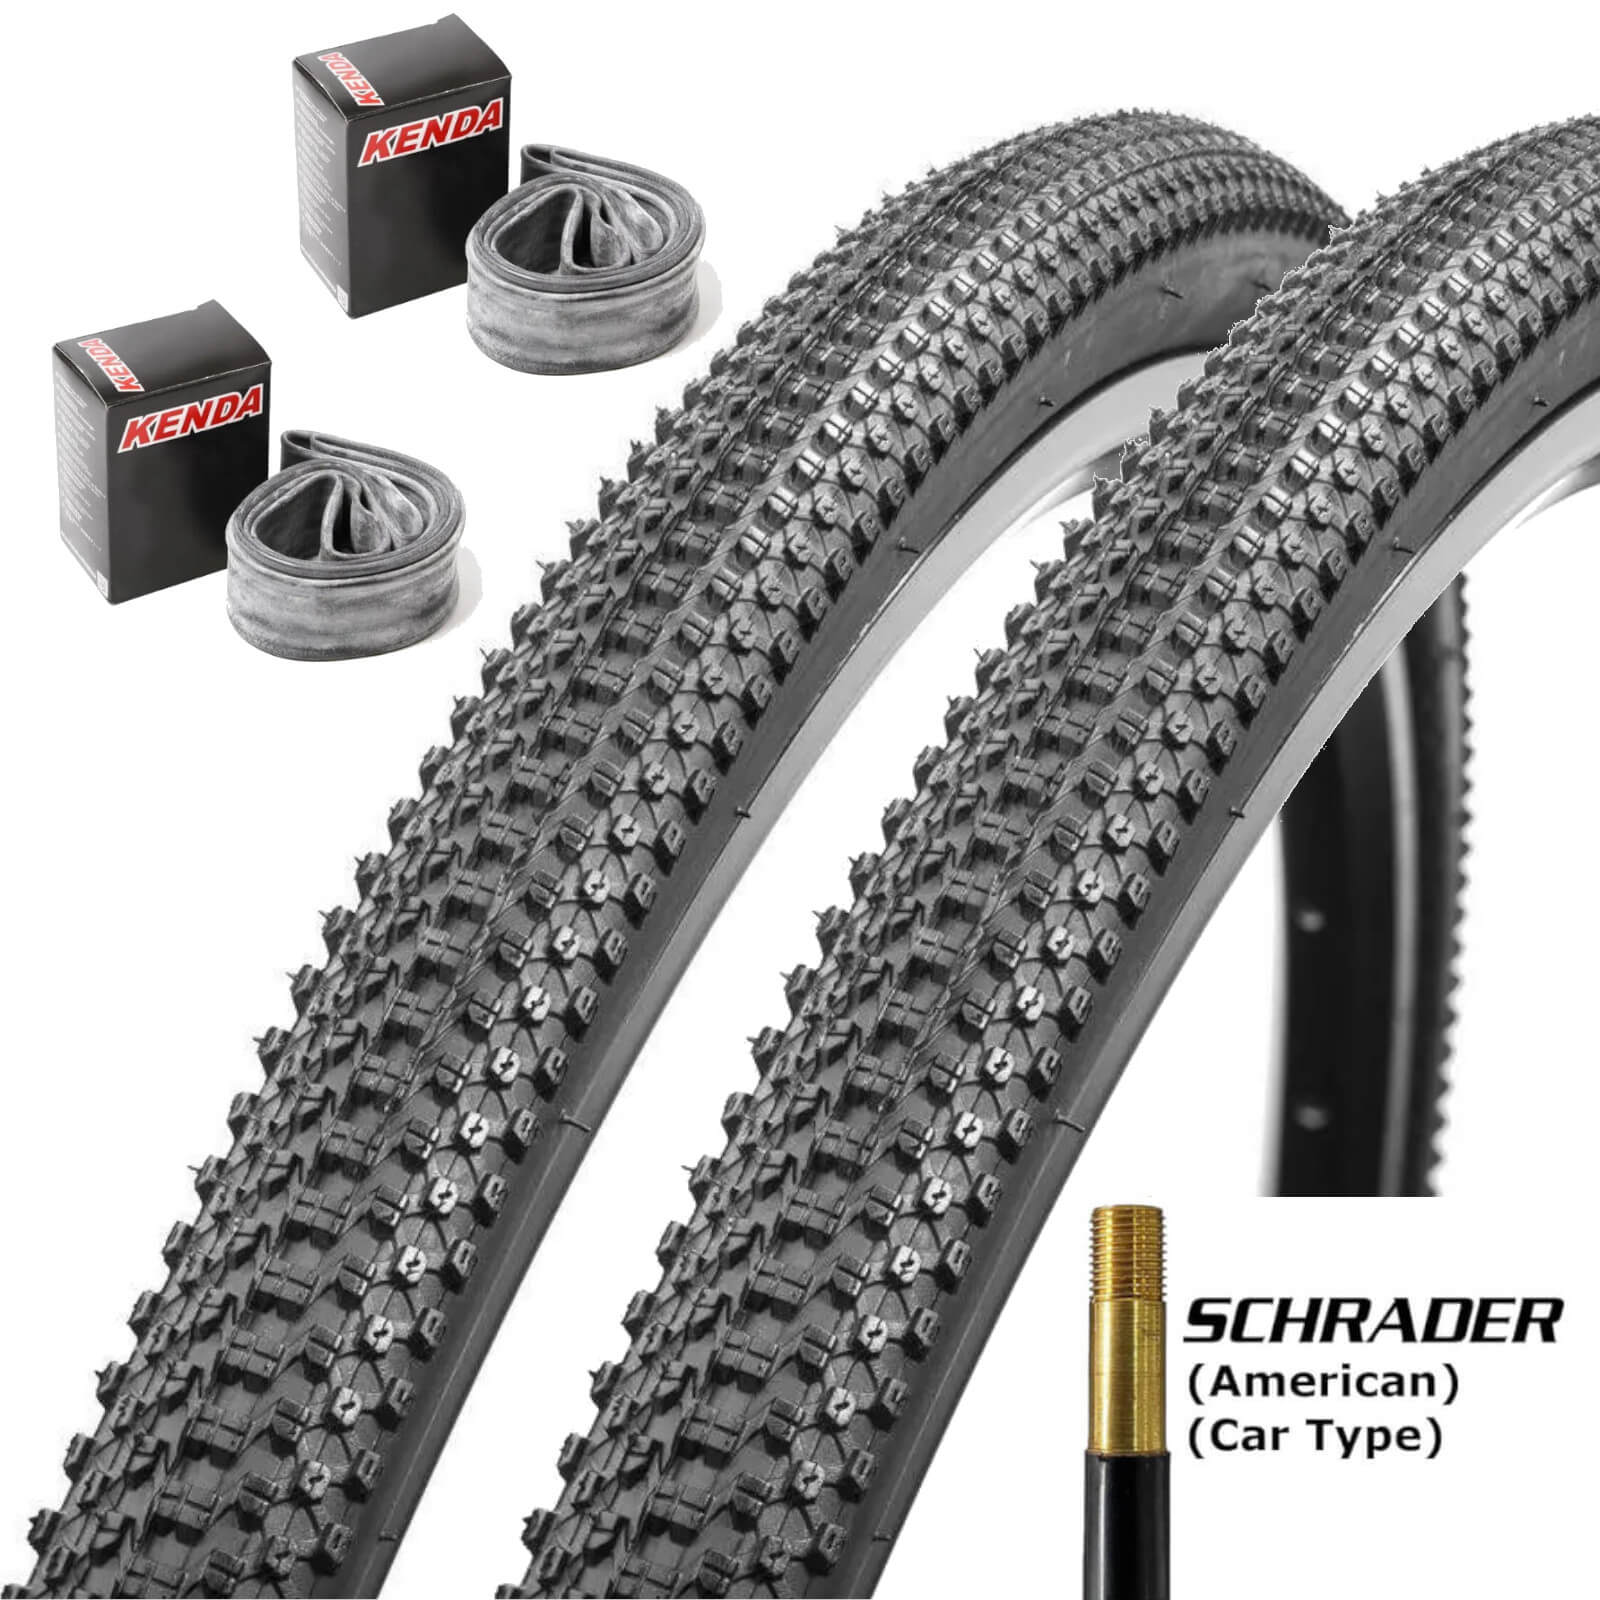 Kenda K1047 Small Block 8 24x1.95" 24 Inch Bike Tyre Pair of Tyres With Schrader Tubes